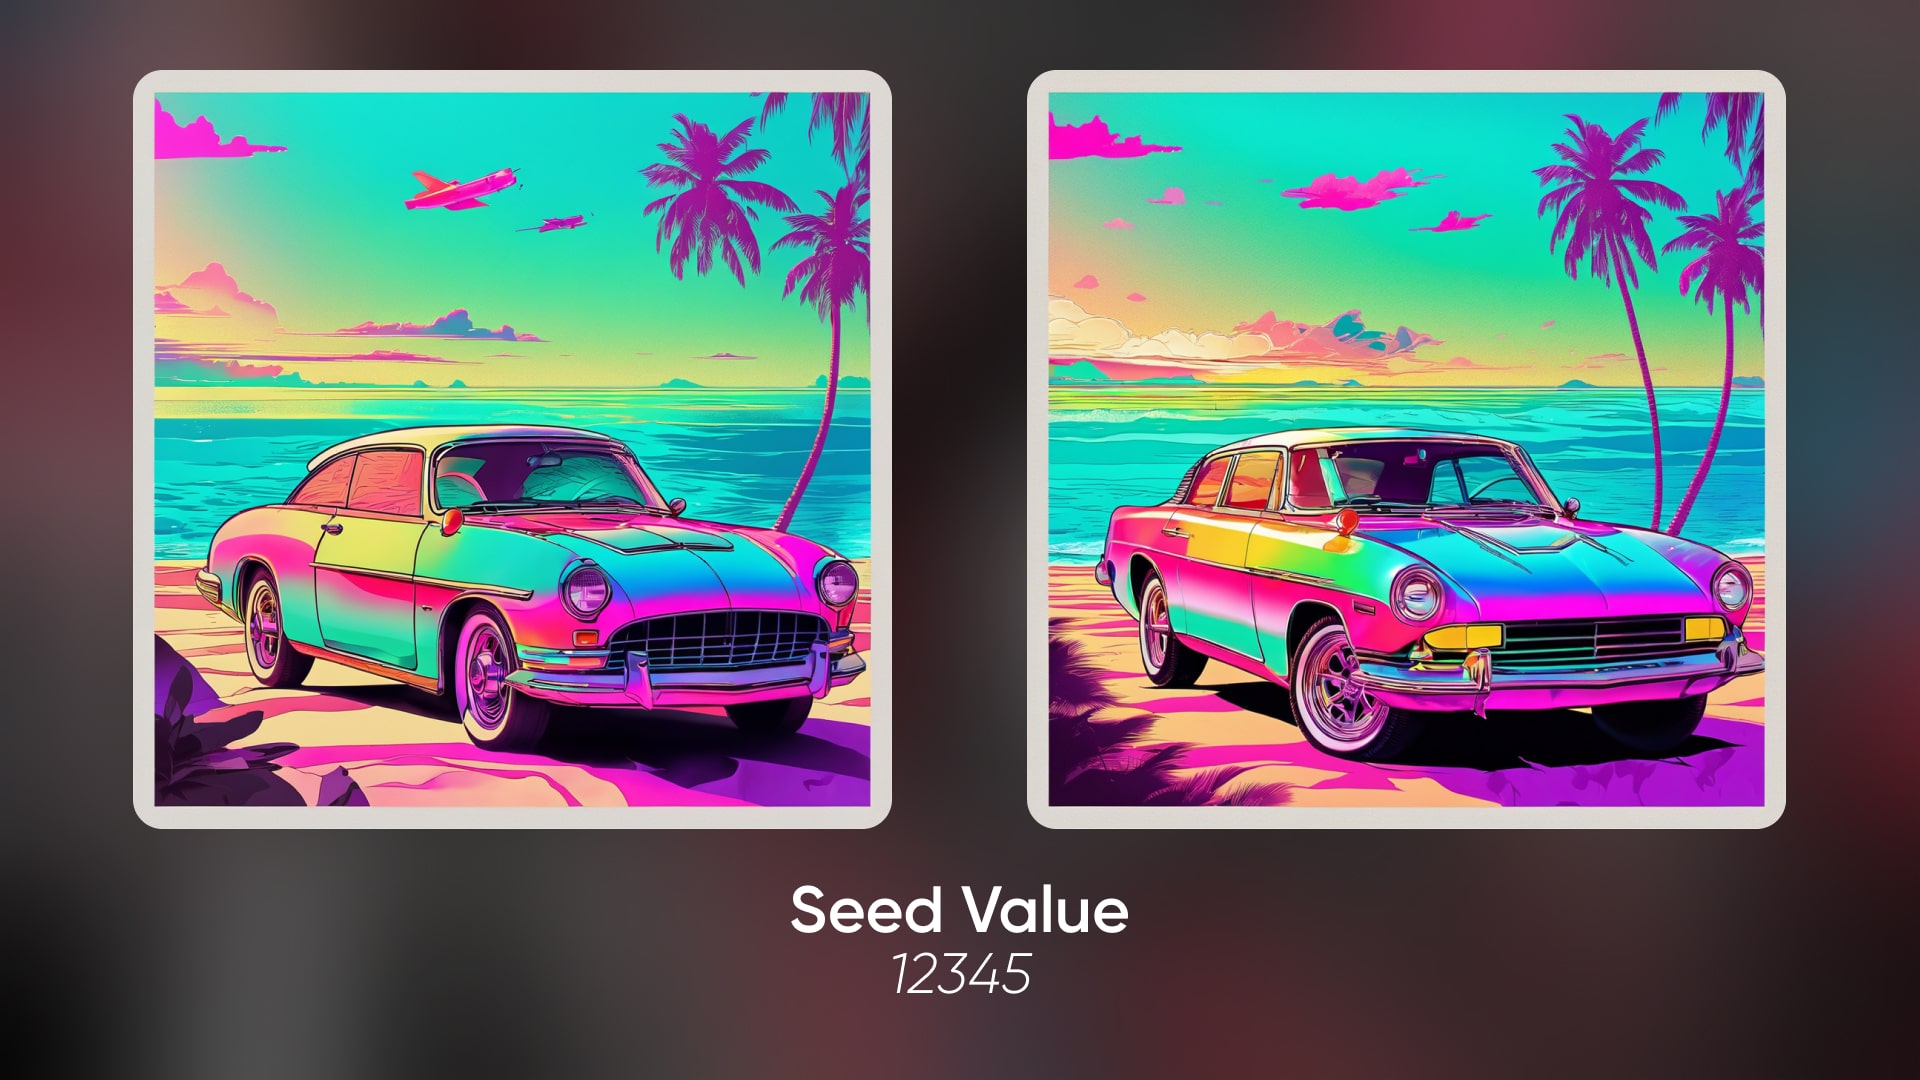 Two similar album covers side by side with a seed number displayed